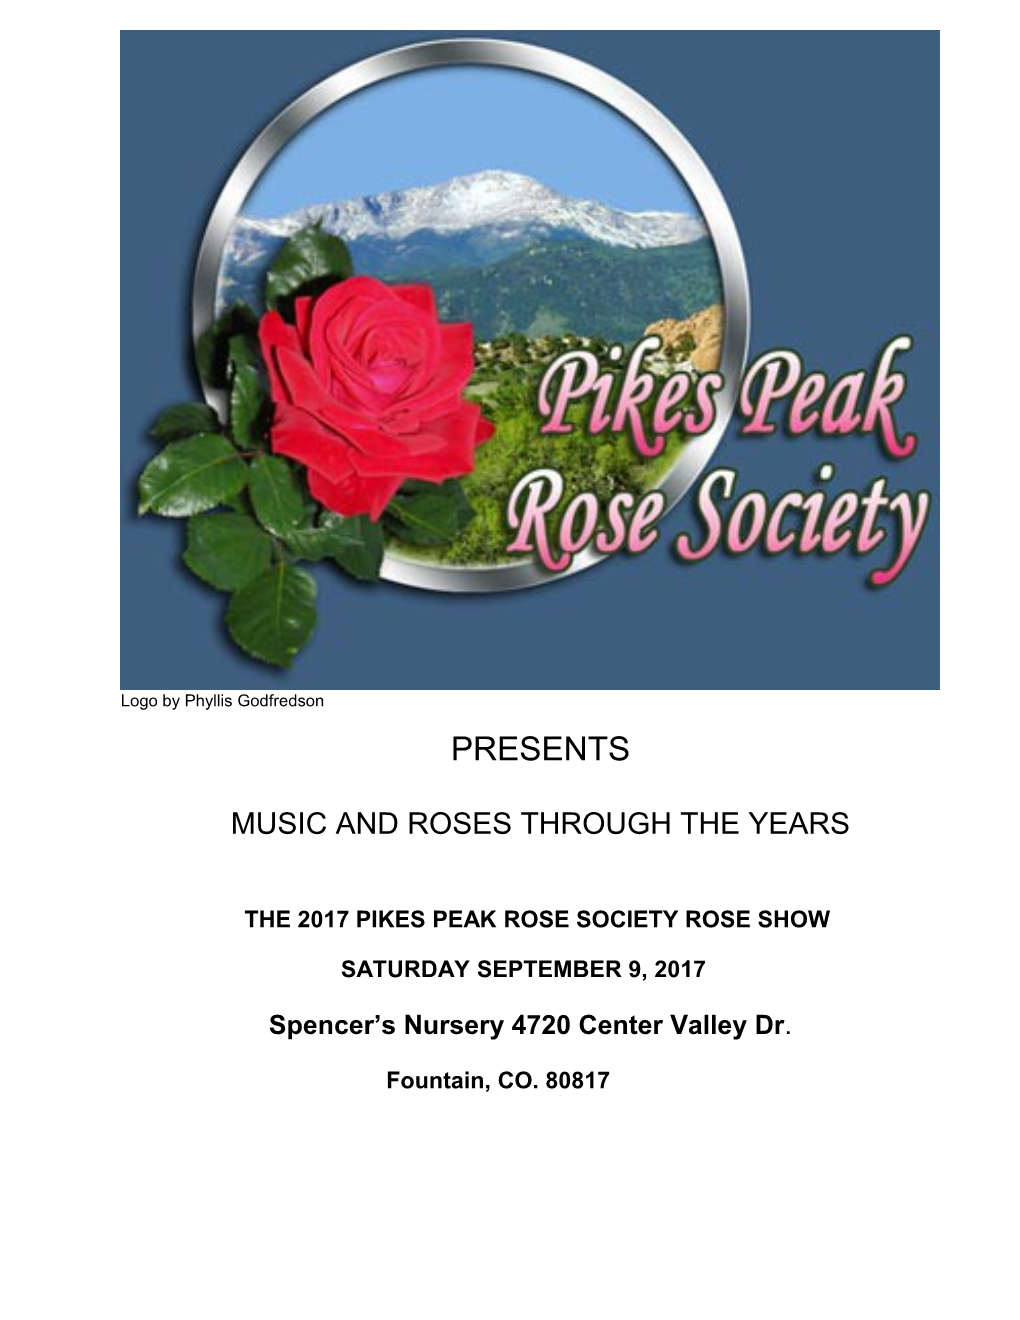 The 2017 Pikes Peak Rose Society Rose Show